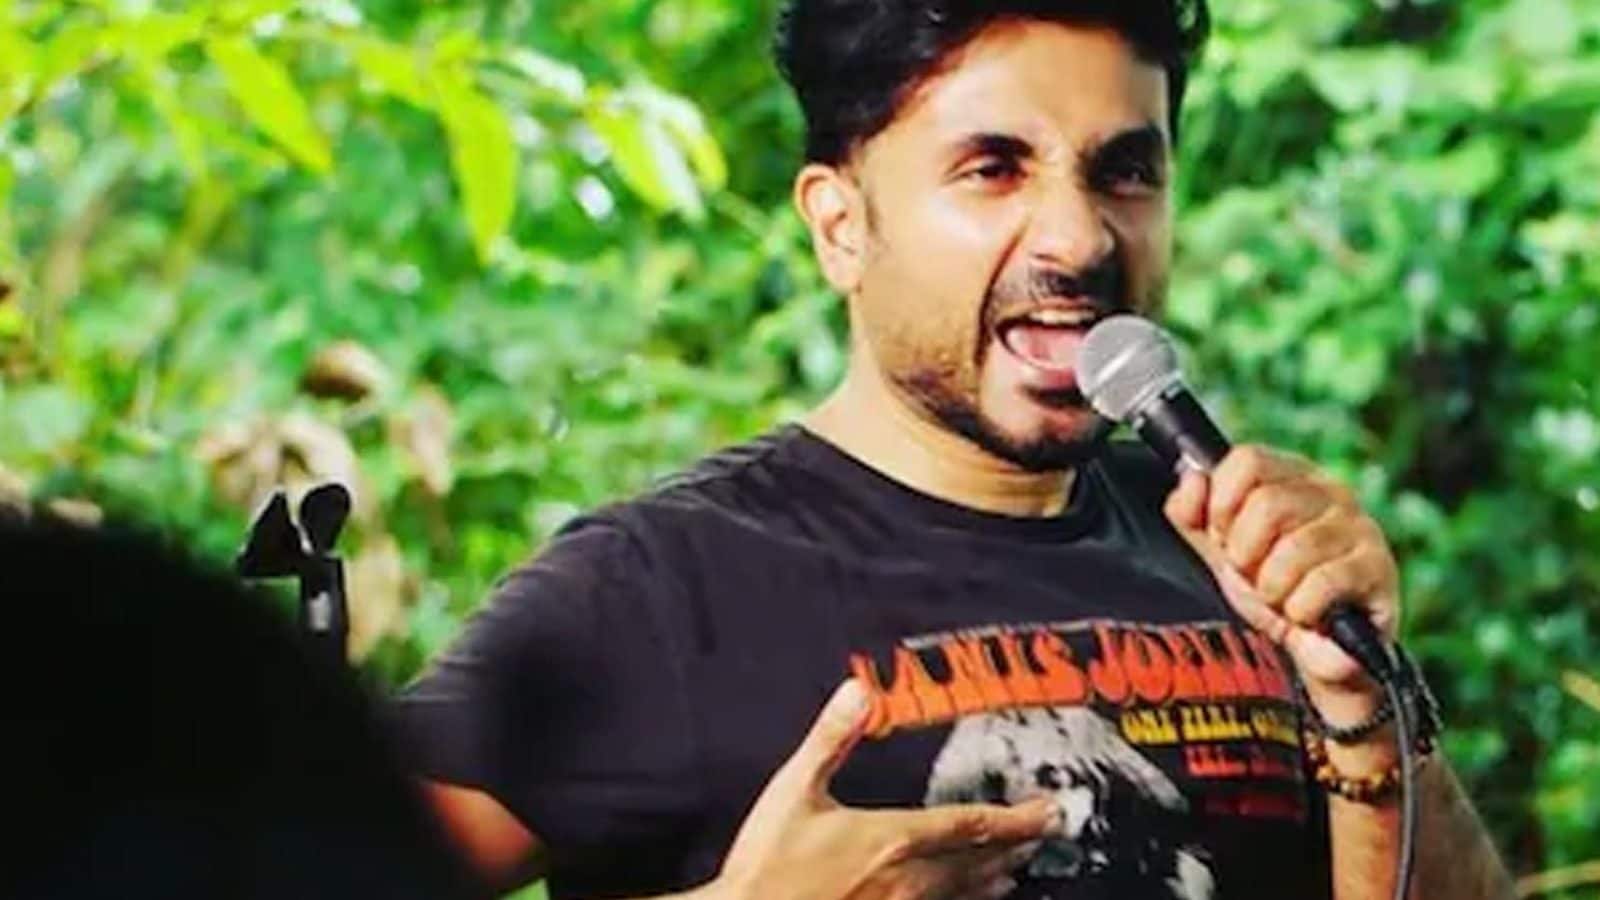 Vir Das, Kiku Sharda, AIB and Other Comedians Who Courted Controversy for Their Stand-up Acts